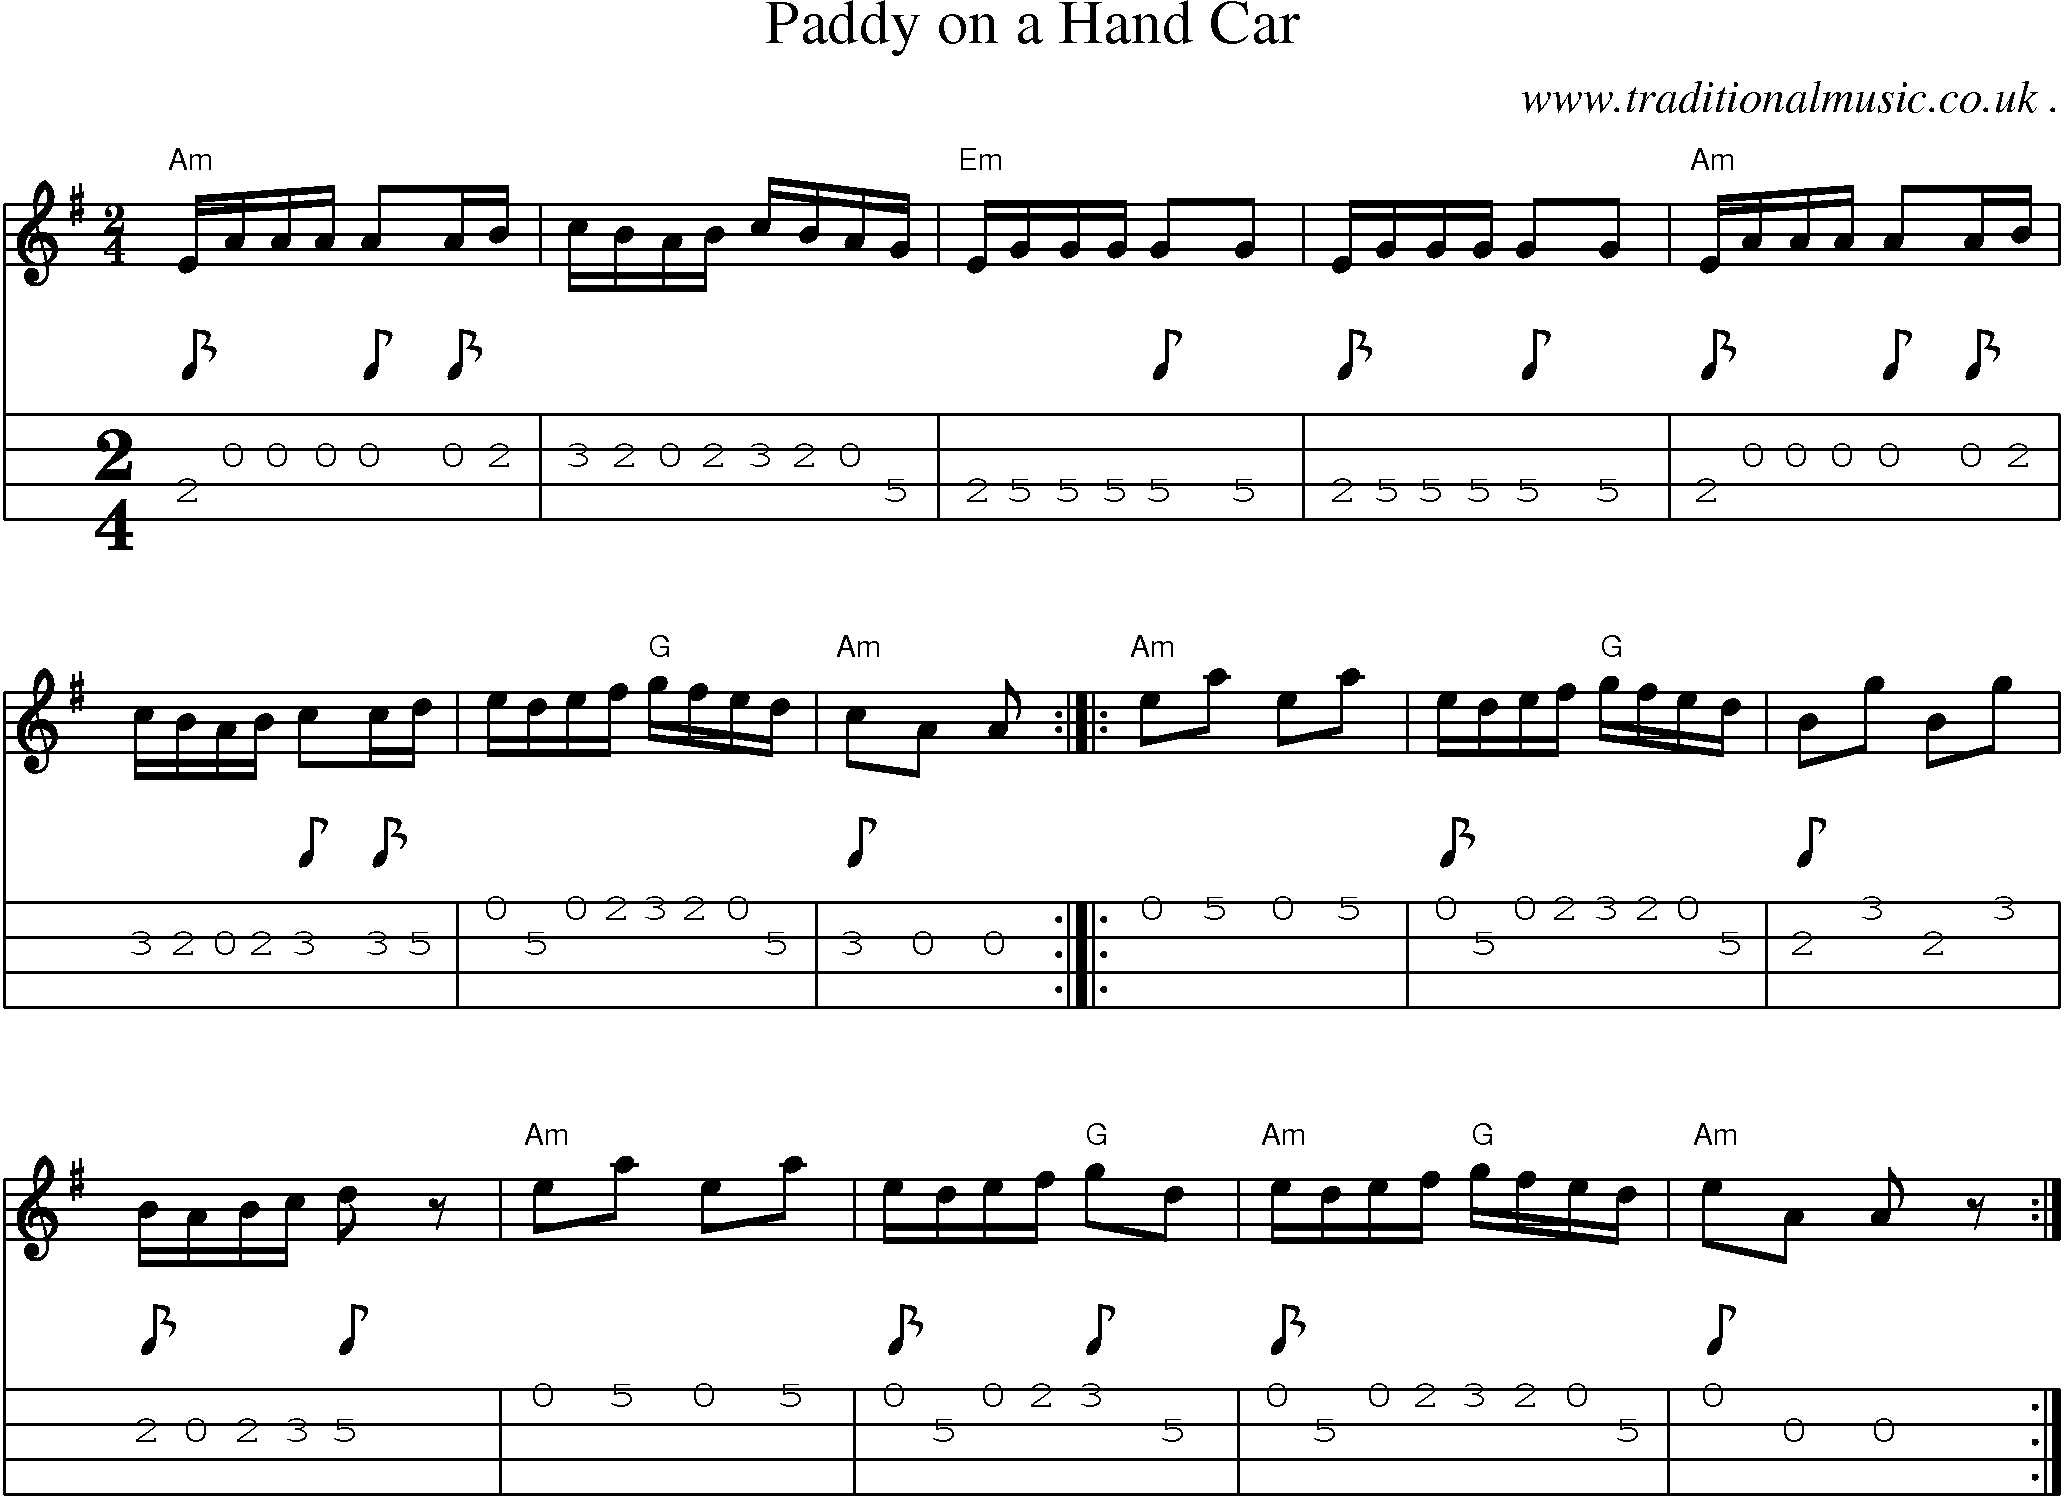 Music Score and Guitar Tabs for Paddy On A Hand Car